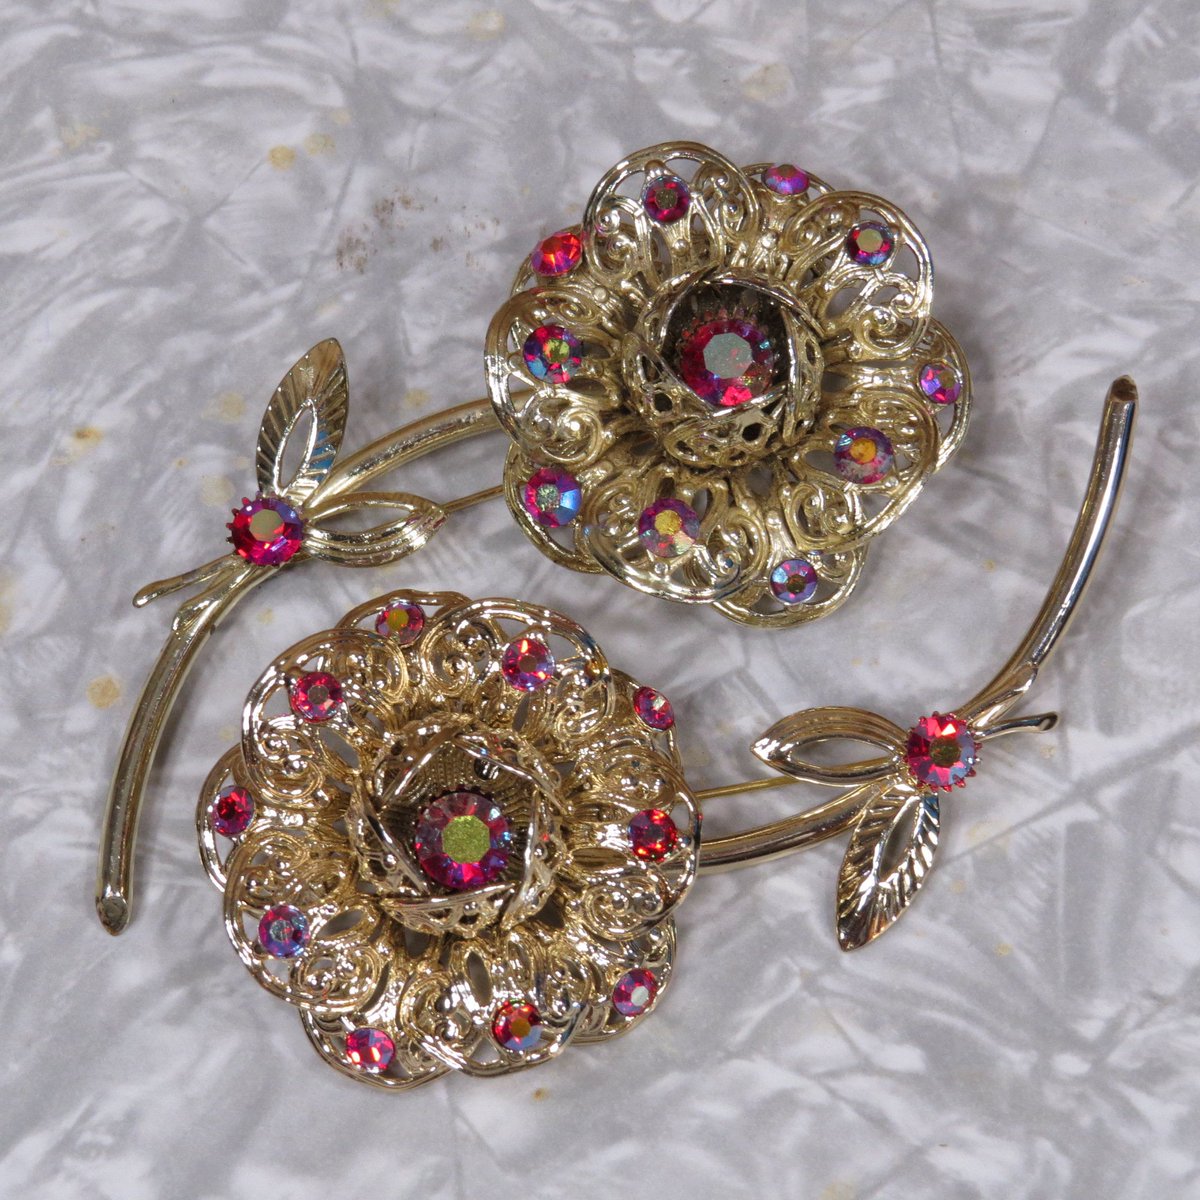 Pair Vintage Sarah Coventry Flower Brooches / Mid Century Jewelry / Sarah Cov / Floral Broach etsy.me/3HkTw9w #midcenturyjewelry #sarahcov #vintagebrooch #flowerbrooch #flowerpin #sarahcoventry #estatejewelry